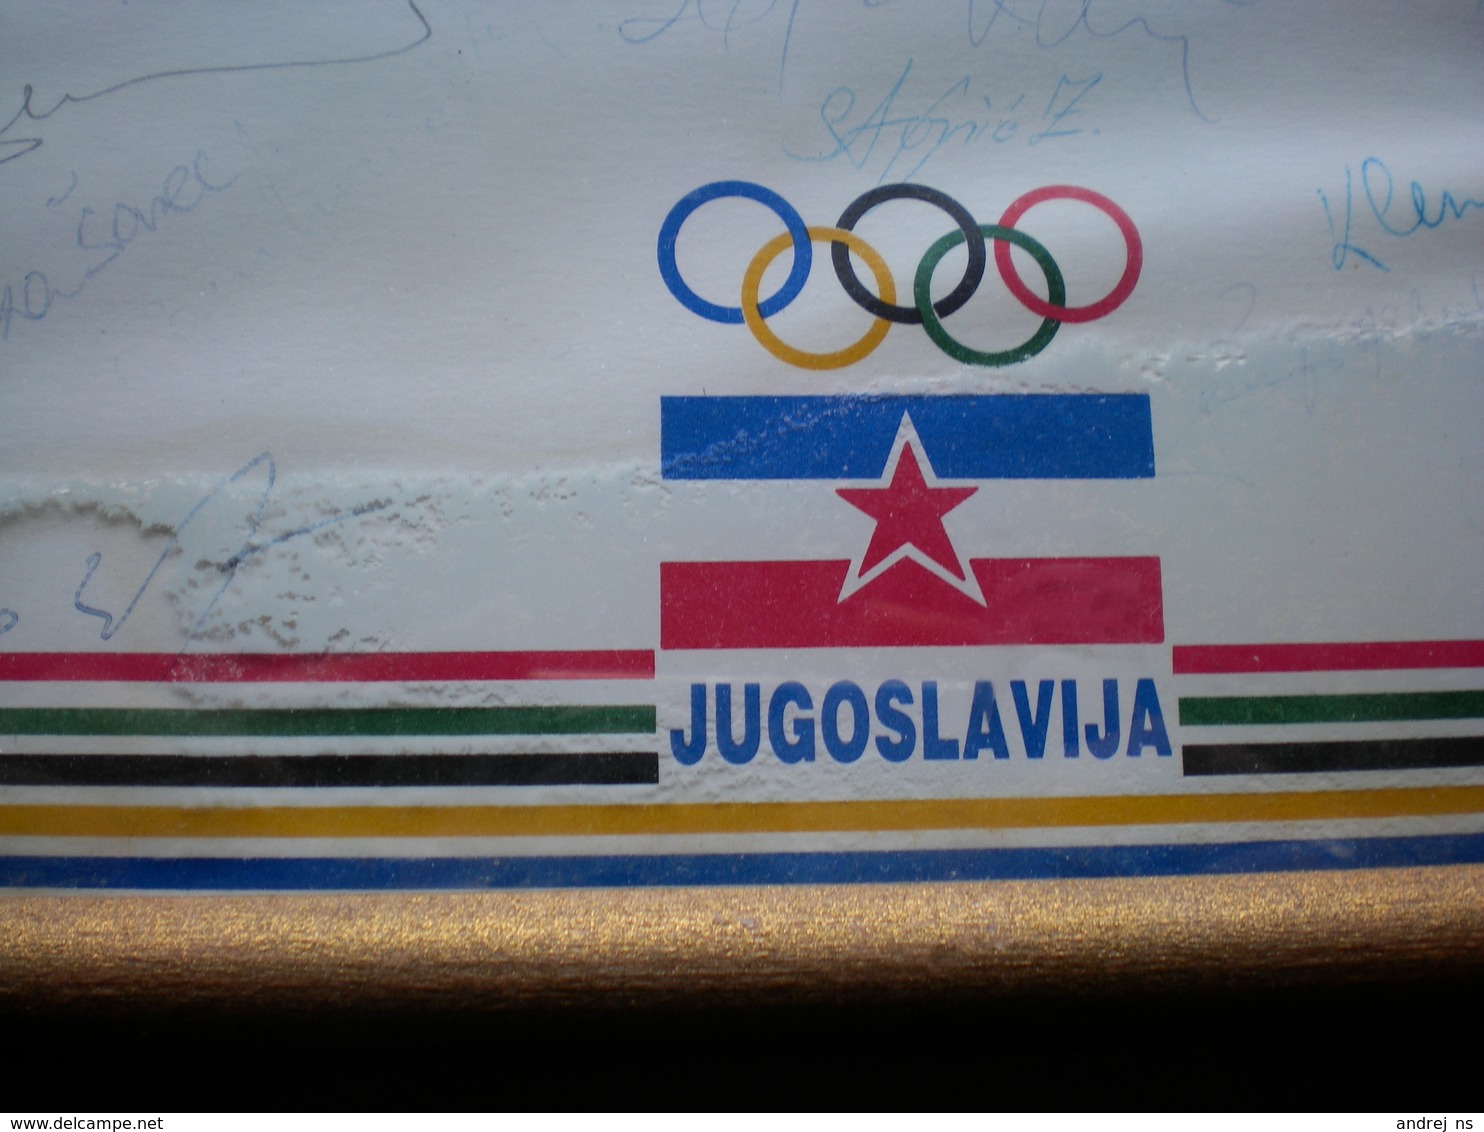 Signatures Authographs Calgary 1988 Yugoslav Olympic Team Sends You Many Greetings From The Plympic Winter Games - Autógrafos